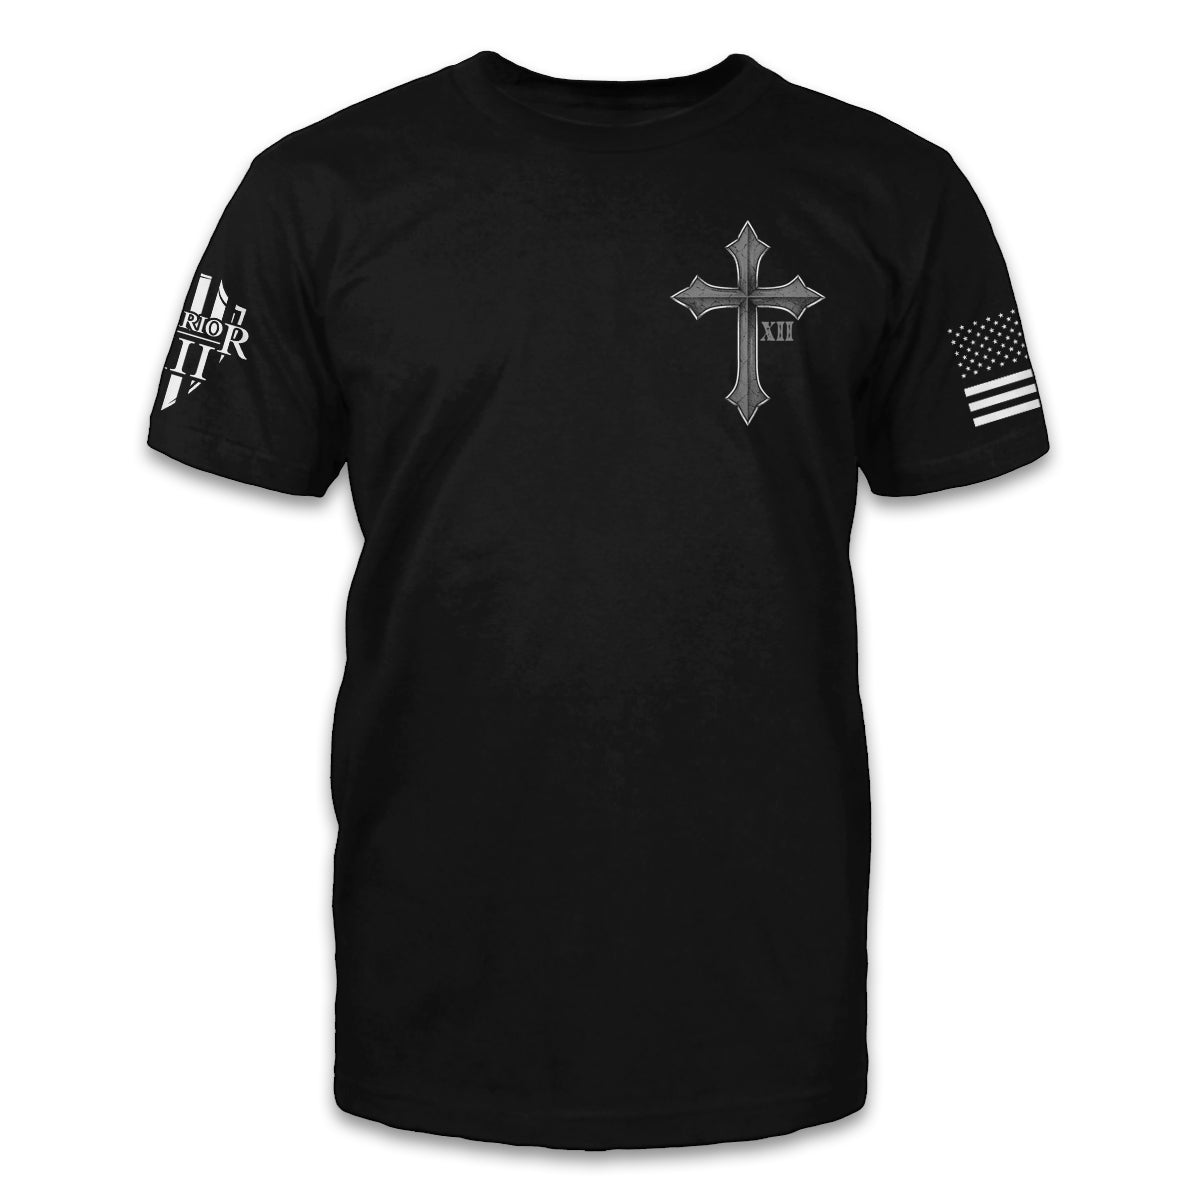 A black t-shirt with a cross and roman numerals XII printed on the front of the shirt.